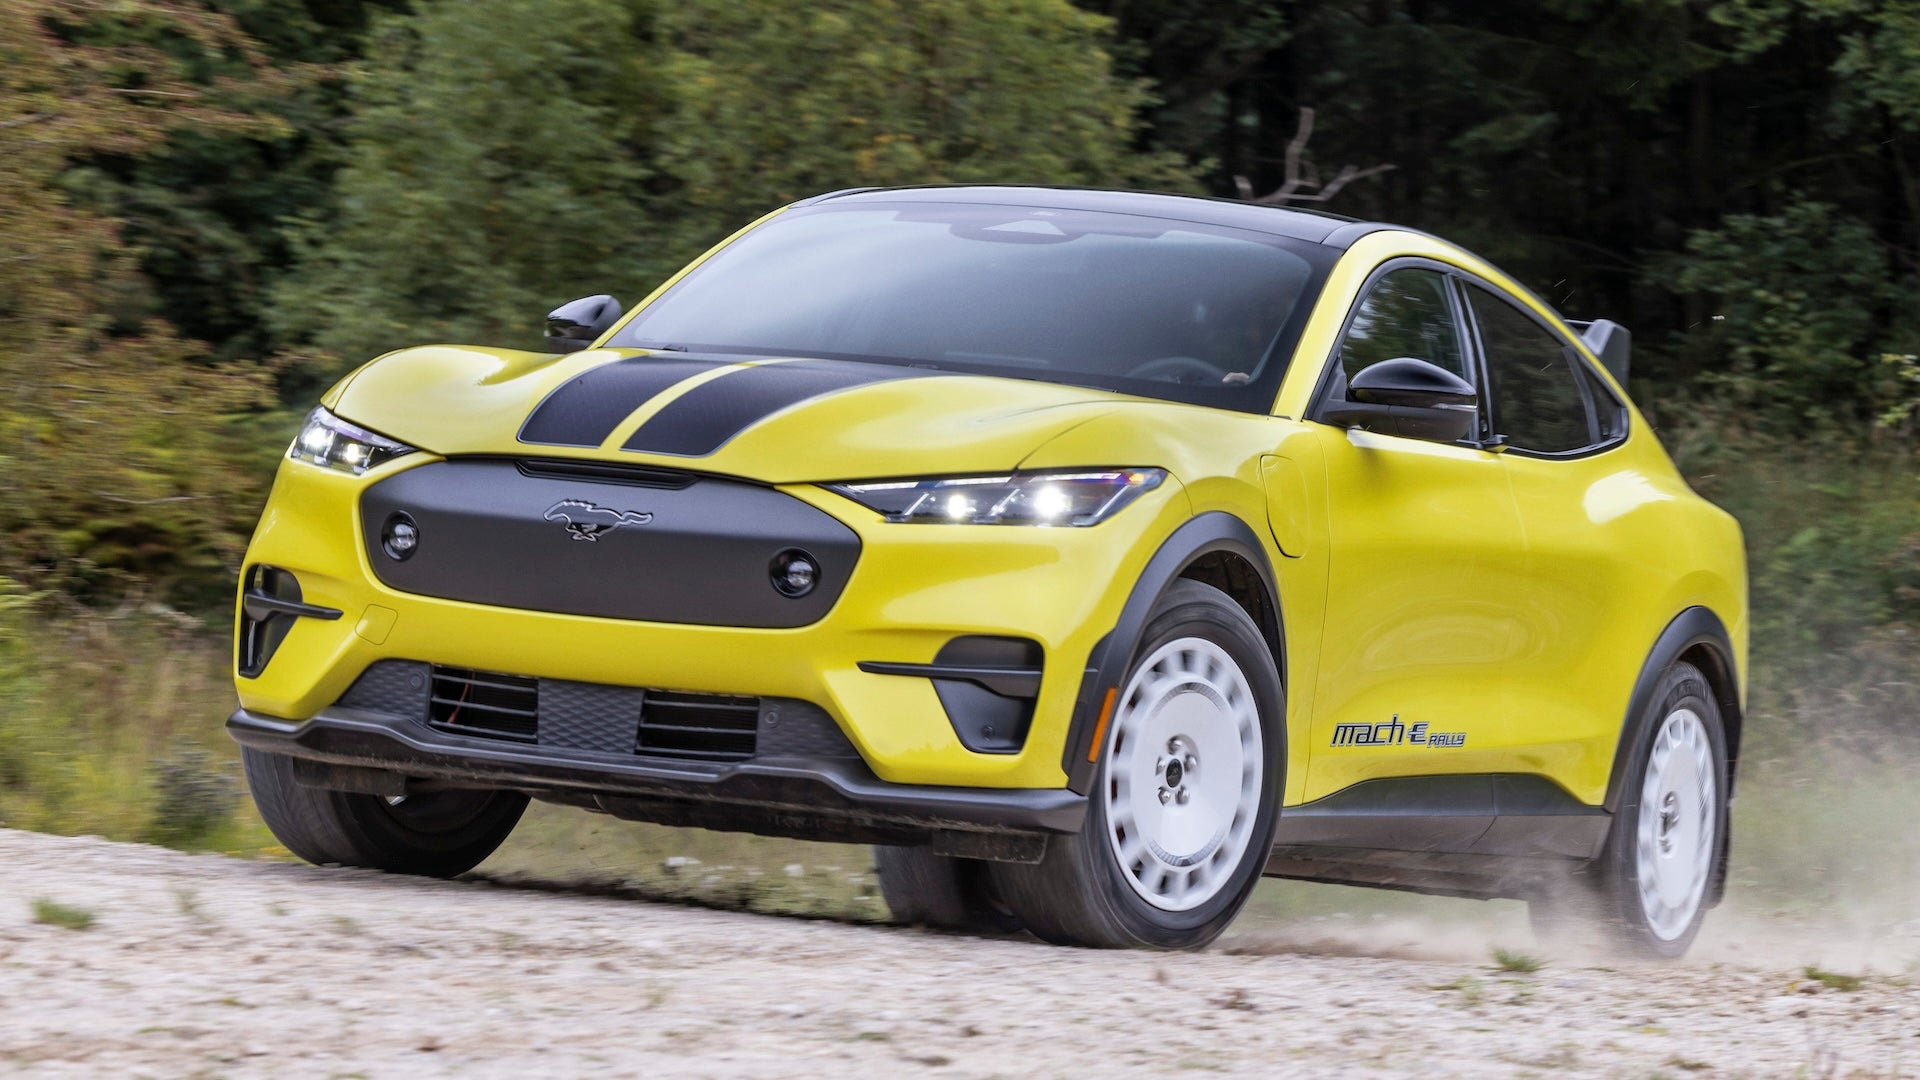 Sales of the Ford Mustang Mach-E have significantly increased following discounts, highlighting the growing popularity of affordable electric vehicles as the future of the automotive industry.